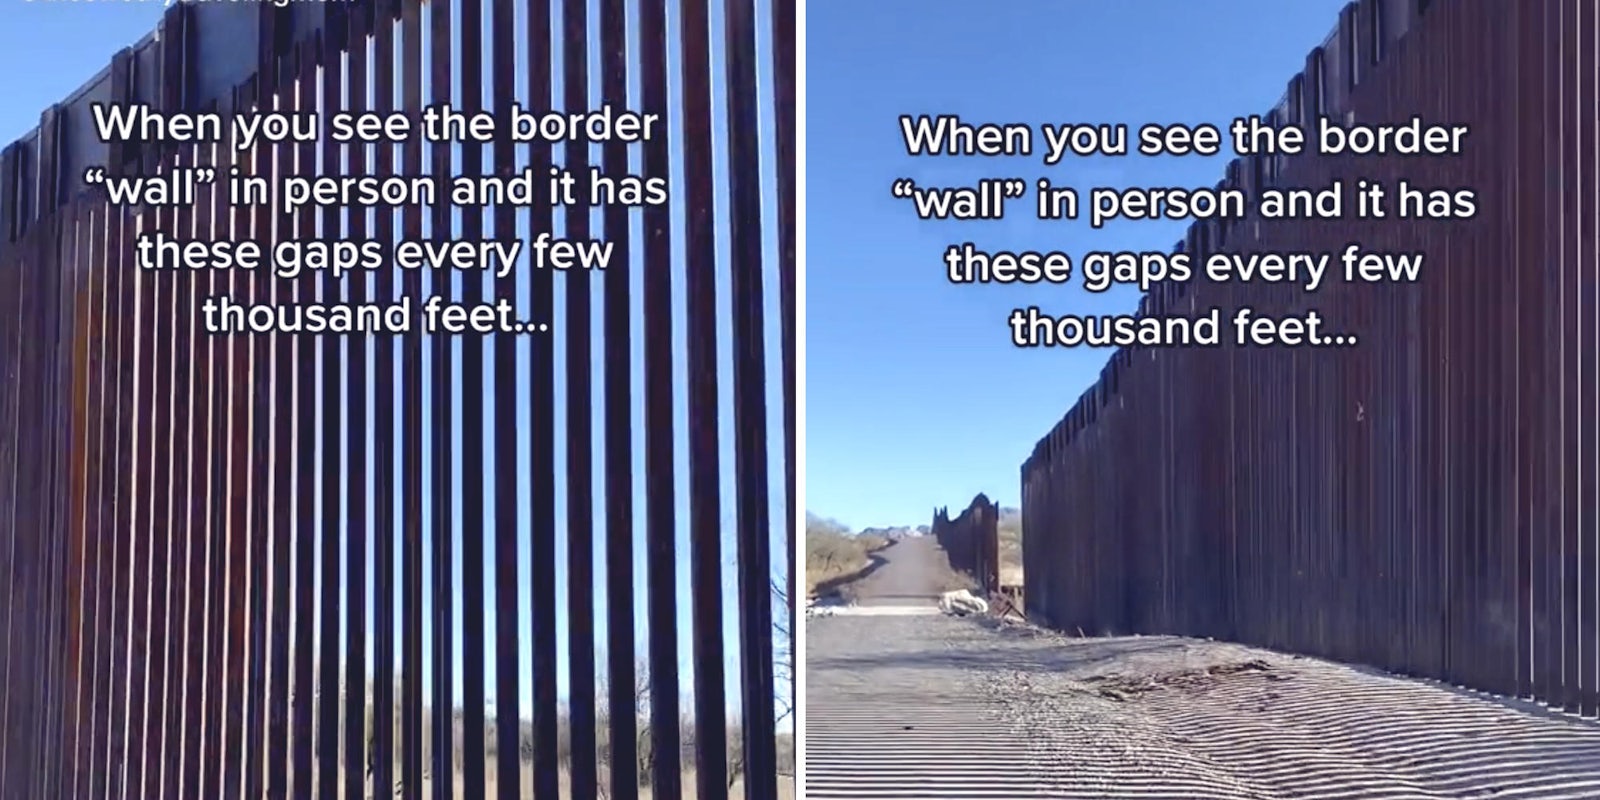 two views of the border wall with a large gap